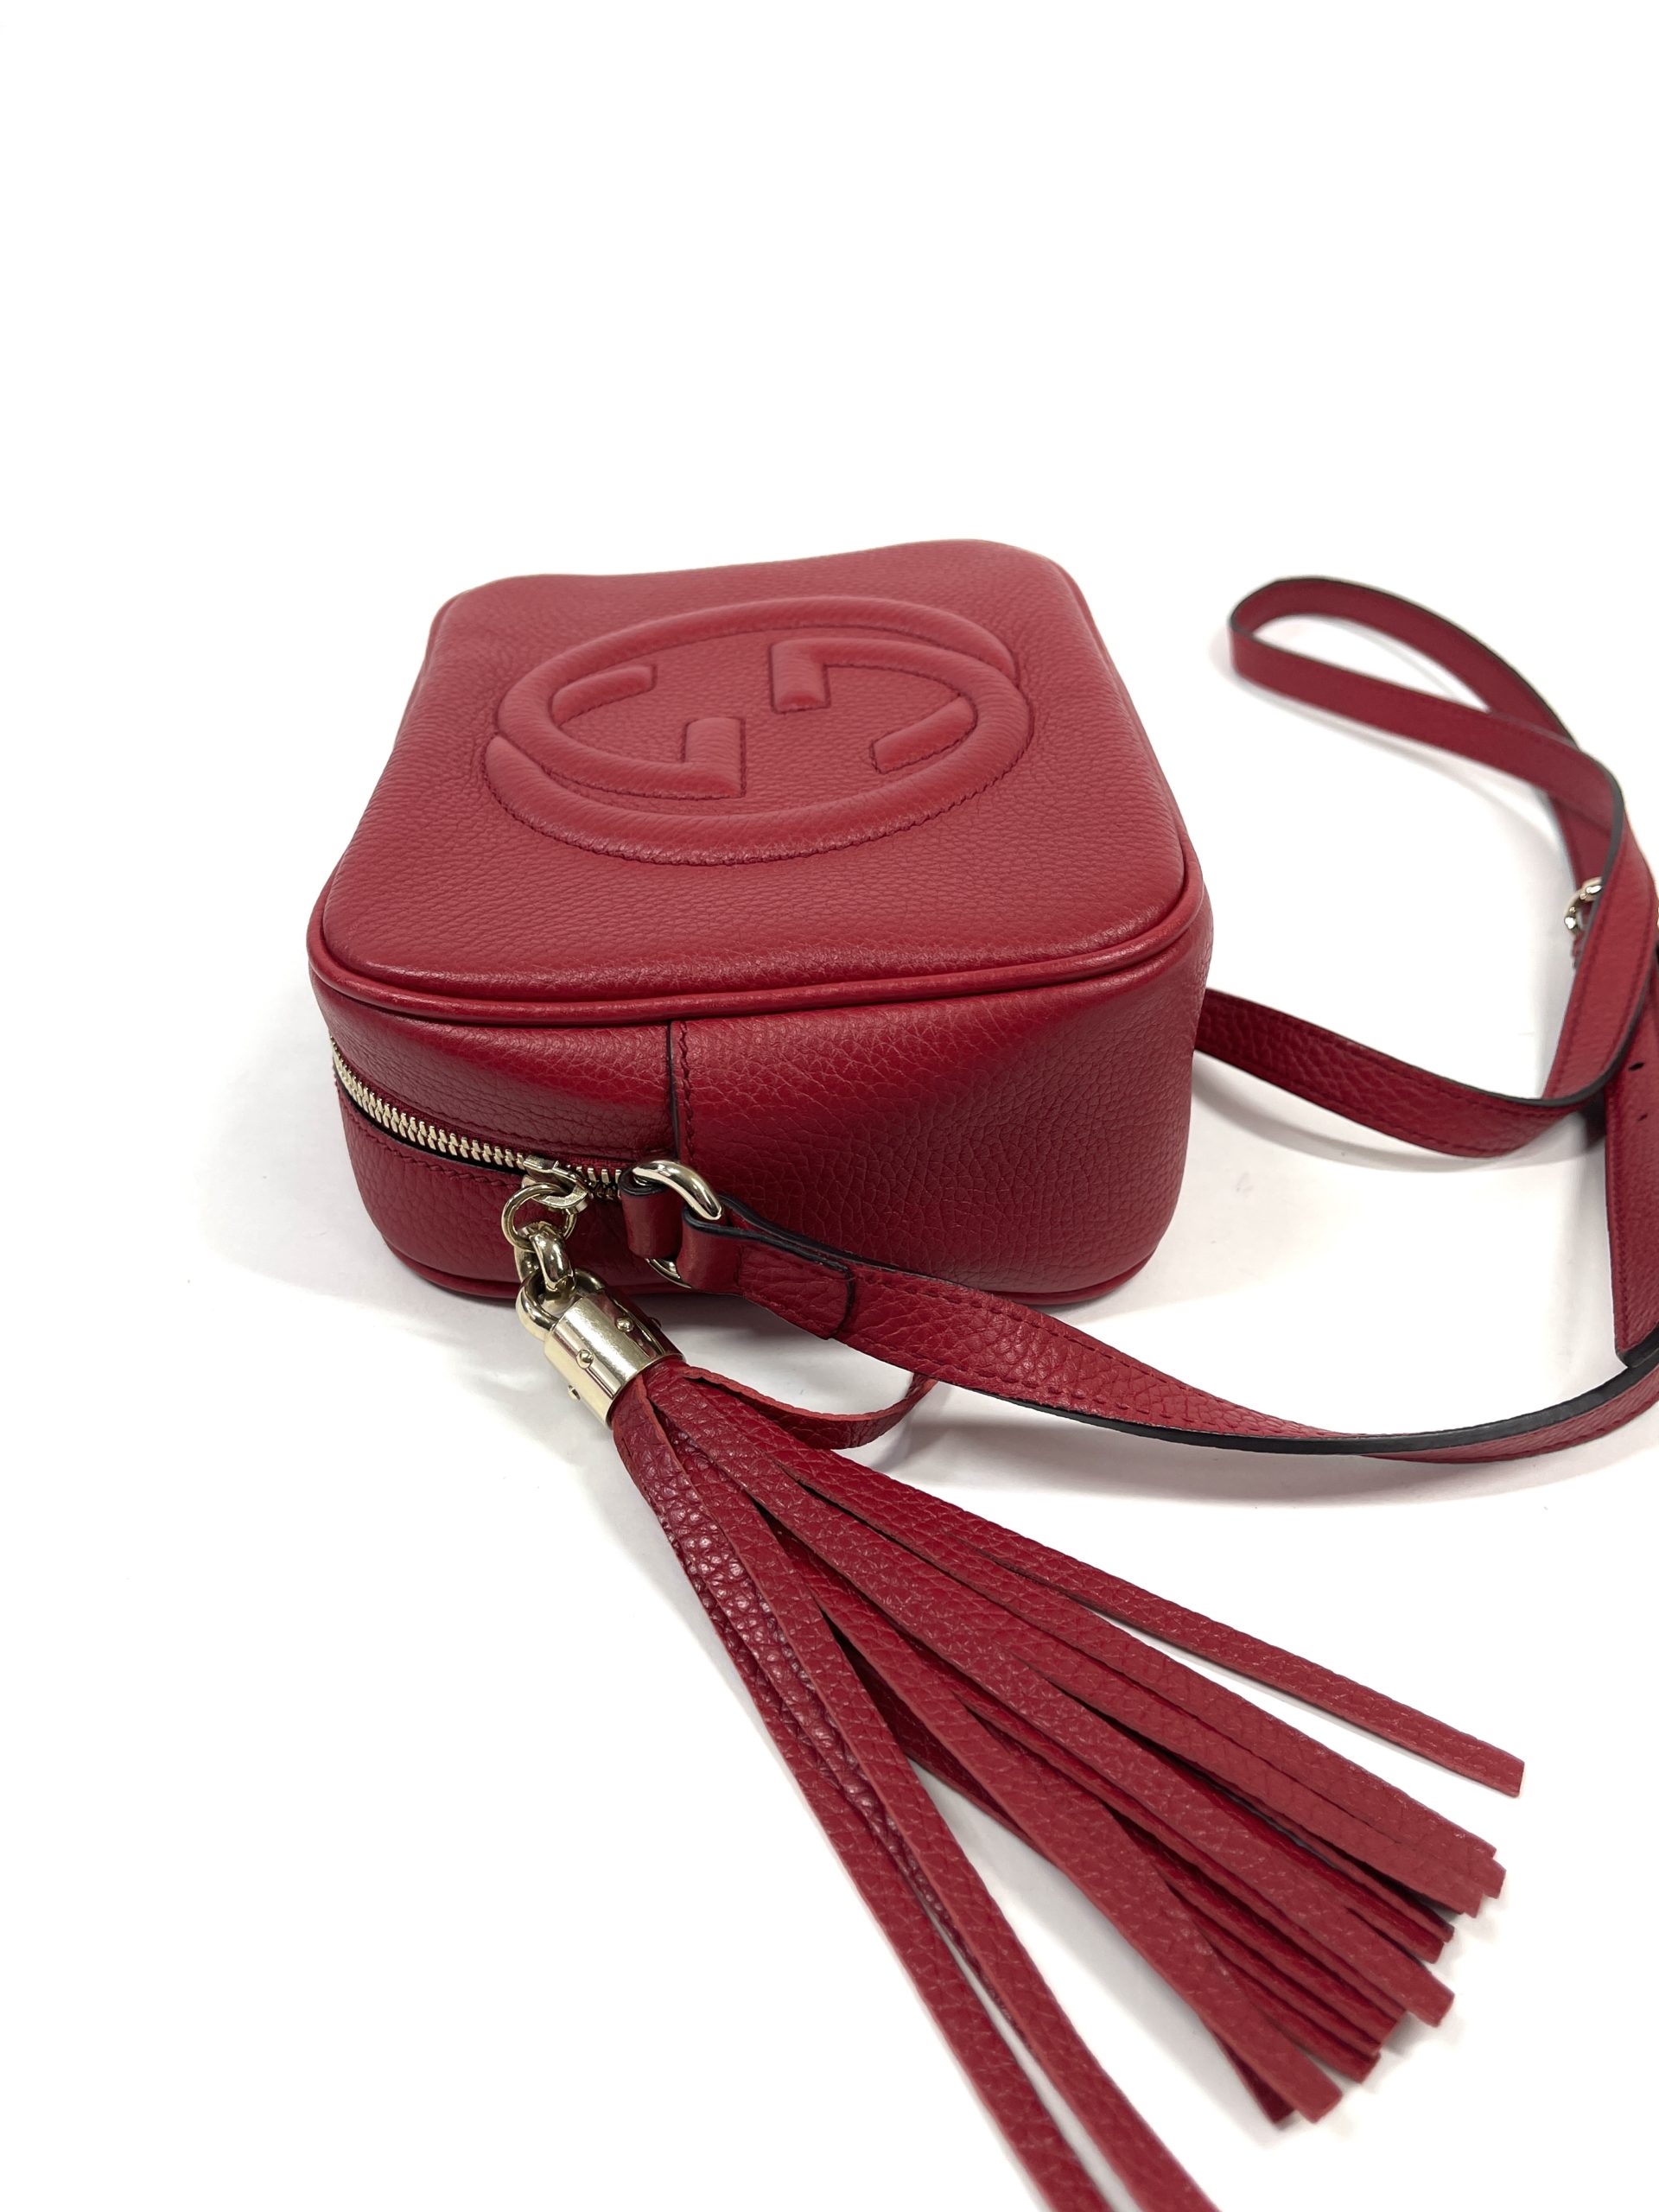 Gucci Red Leather Soho Women's Crossbody Bag 598211 A7M0G 6523